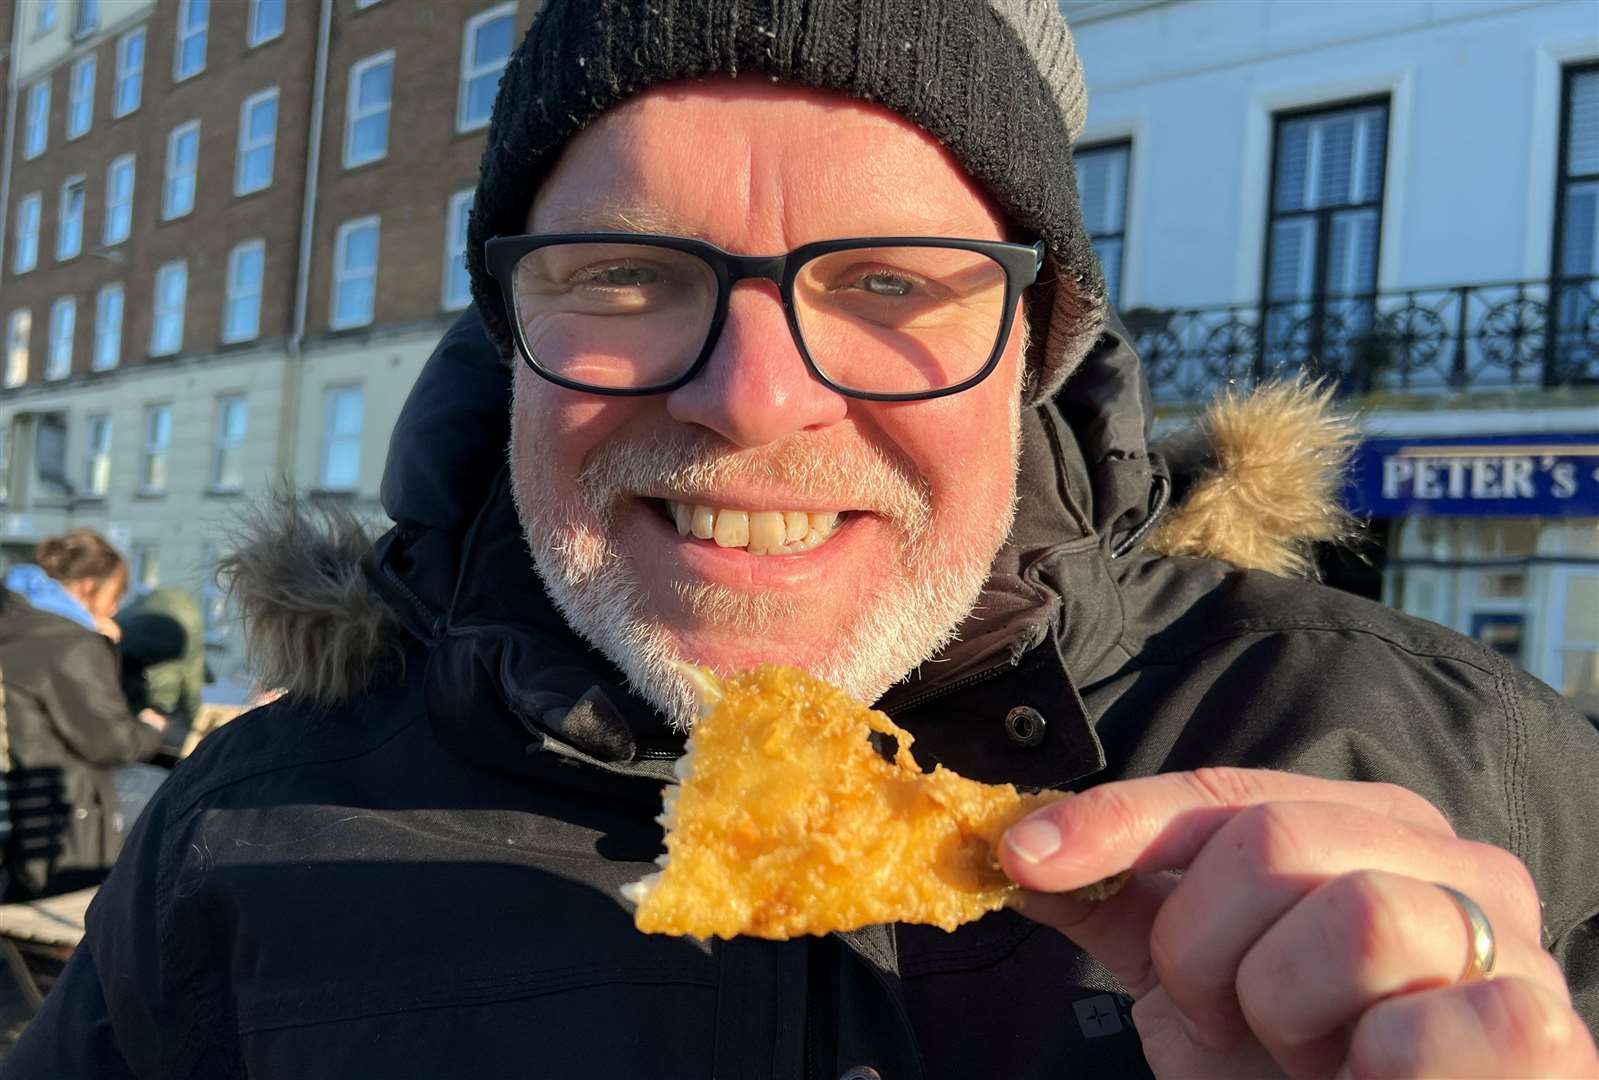 Your reviewer braves the chilly air to scoff his free bit of fish